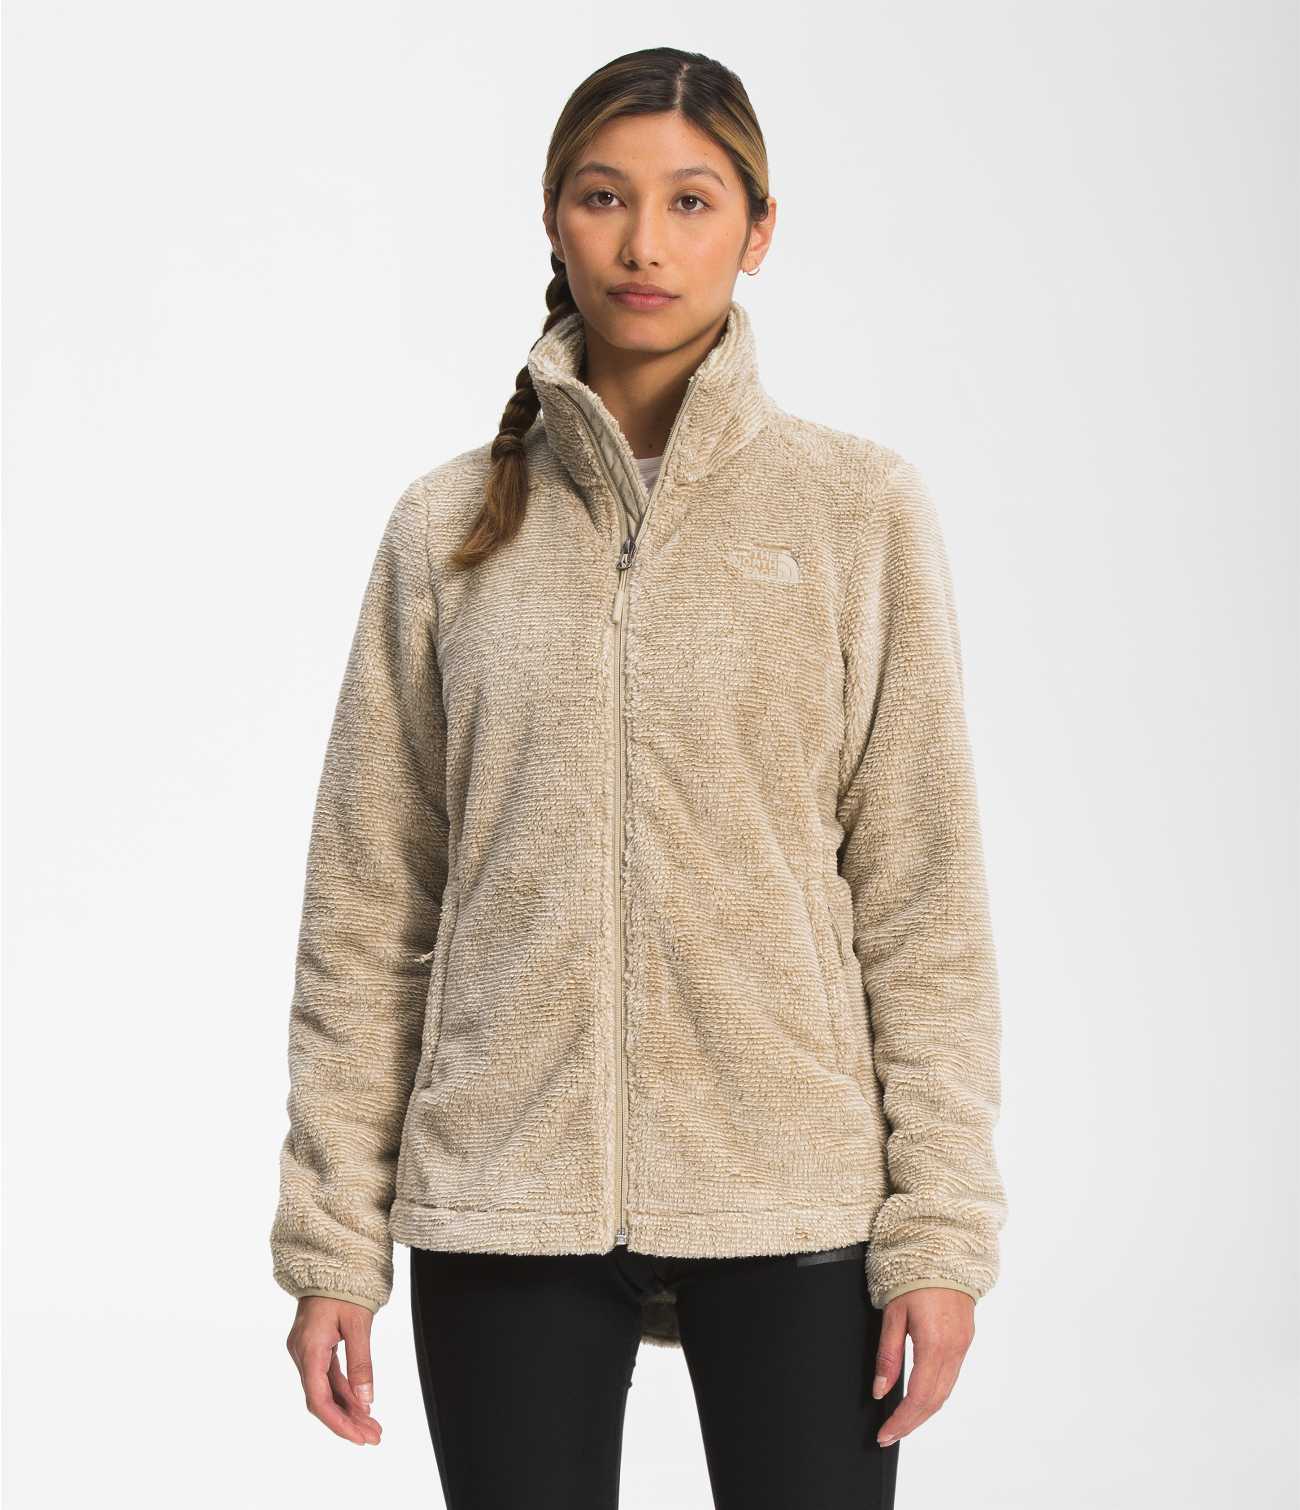 The North Face Osito Jacket  Jackets, North face women, Clothes